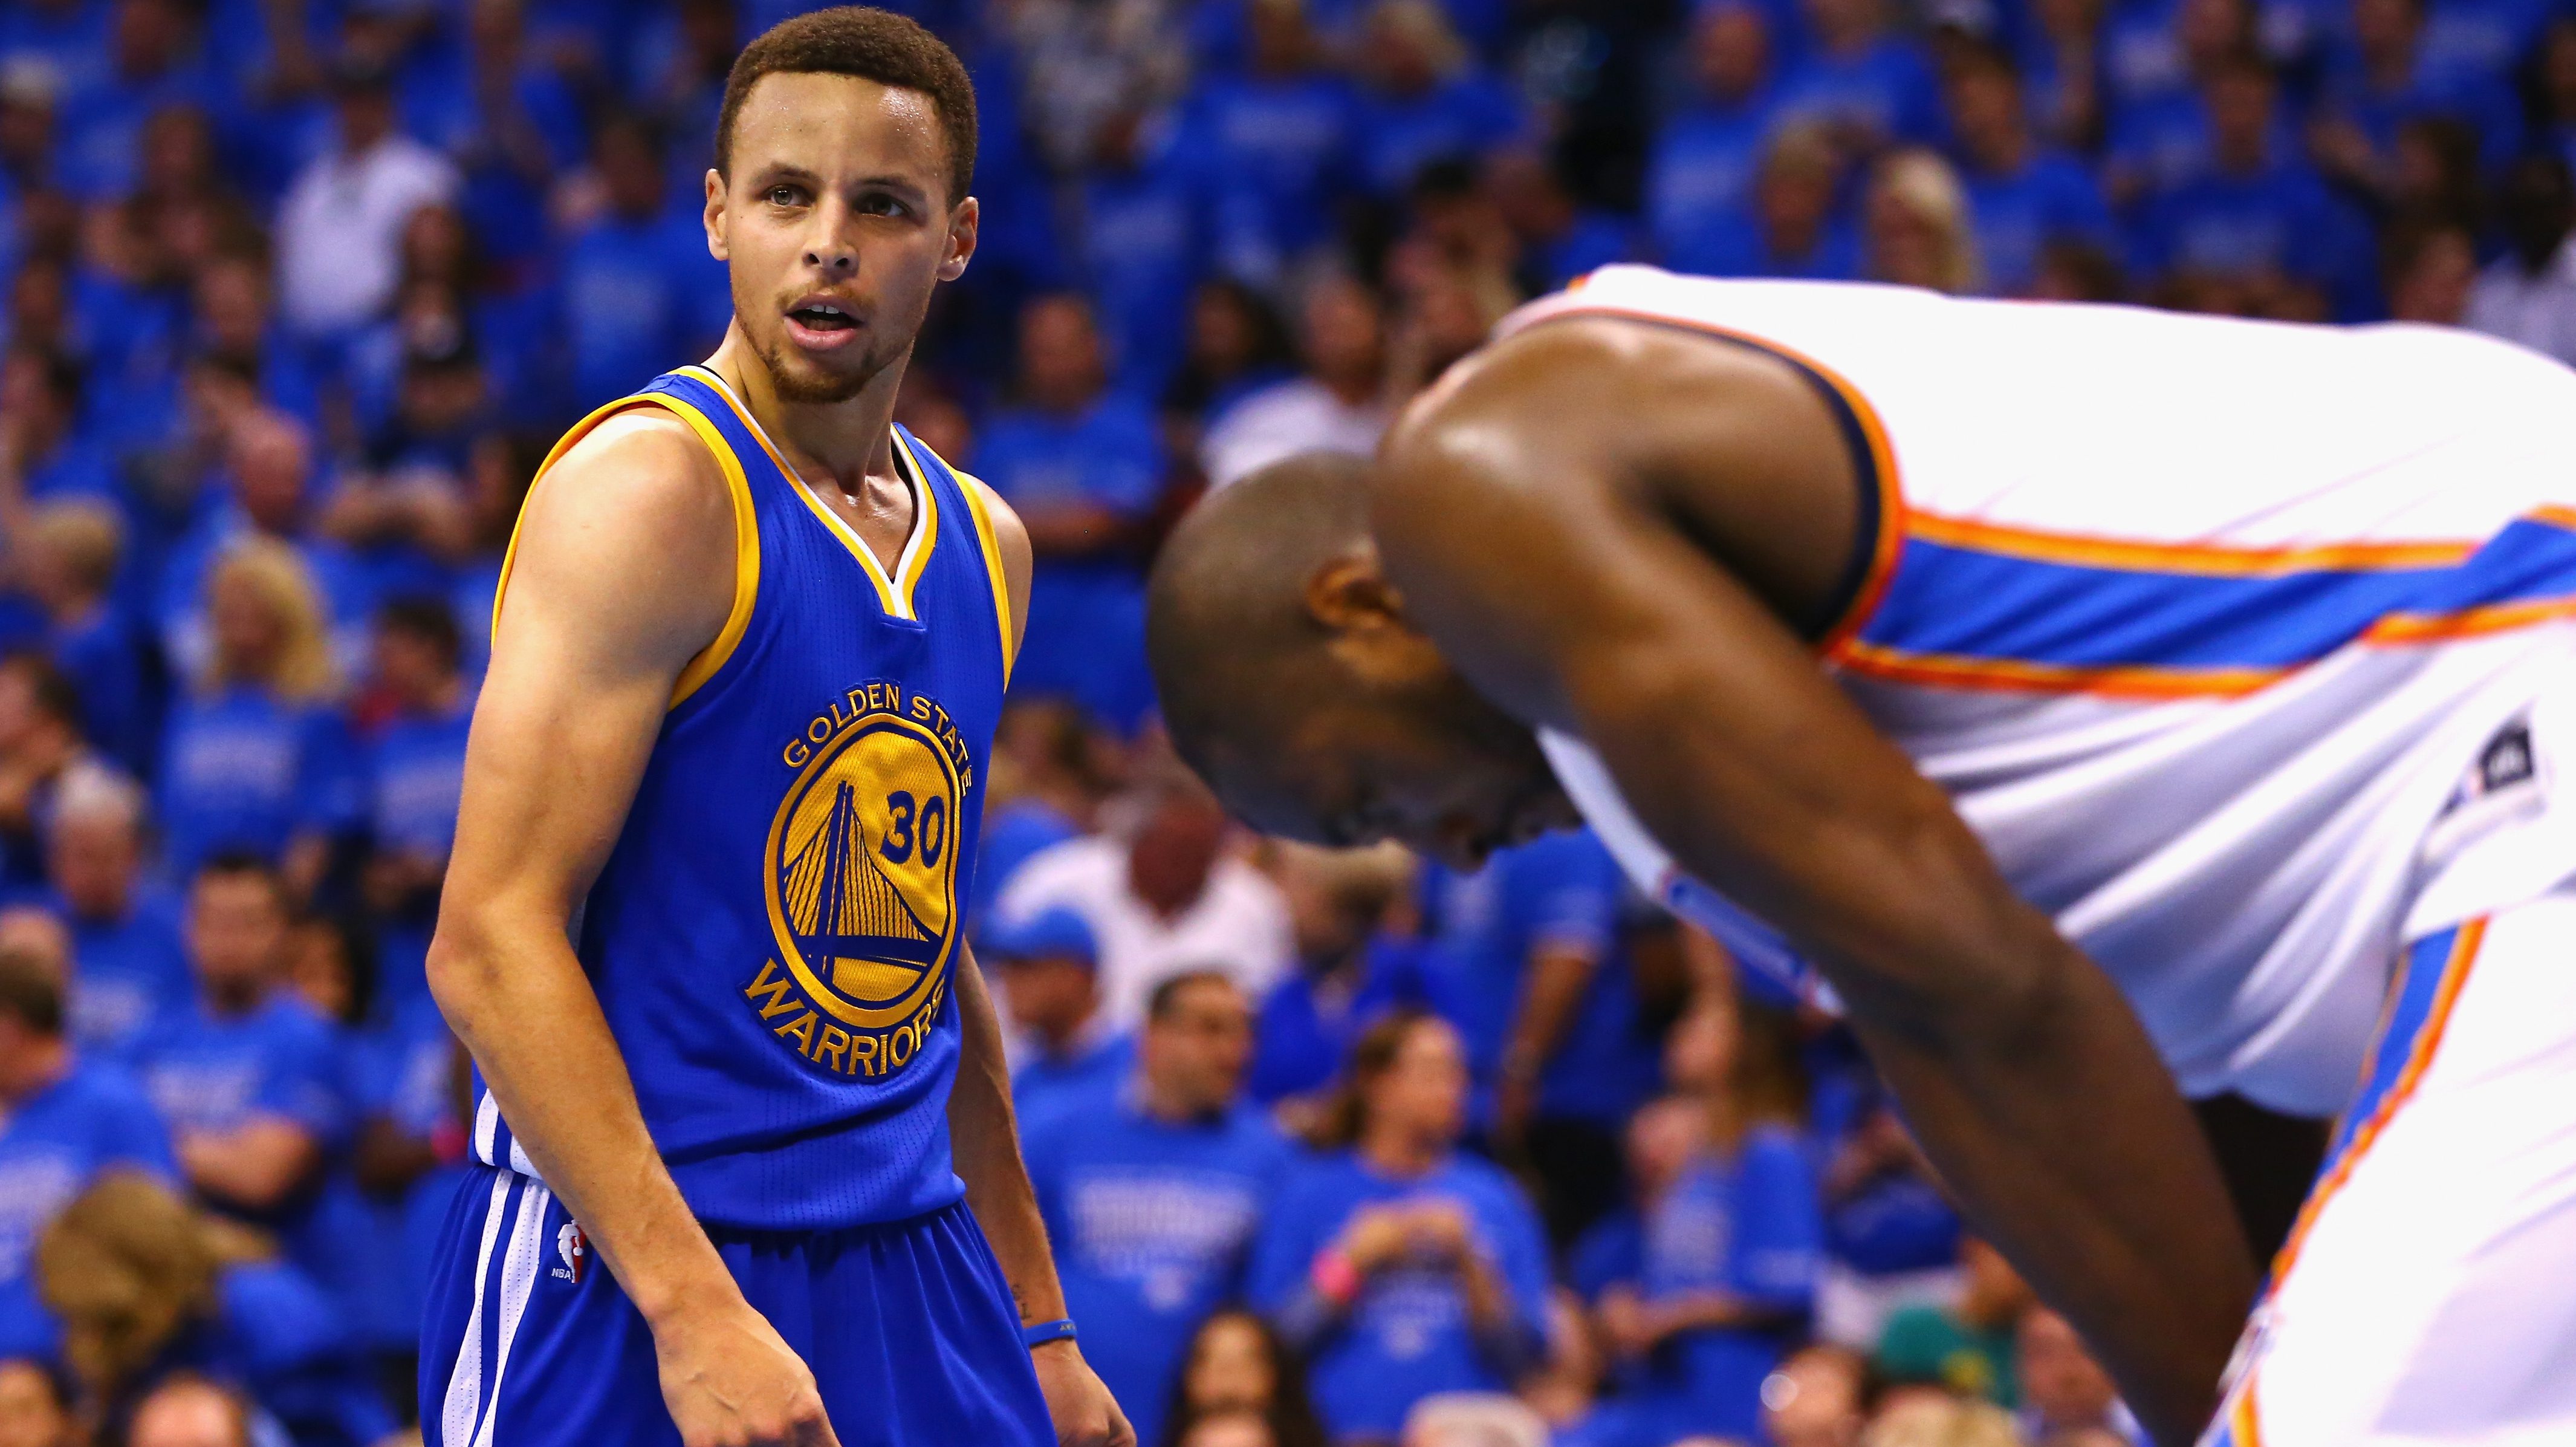 Warriors vs Thunder Live Stream How to Watch Game 7 Free